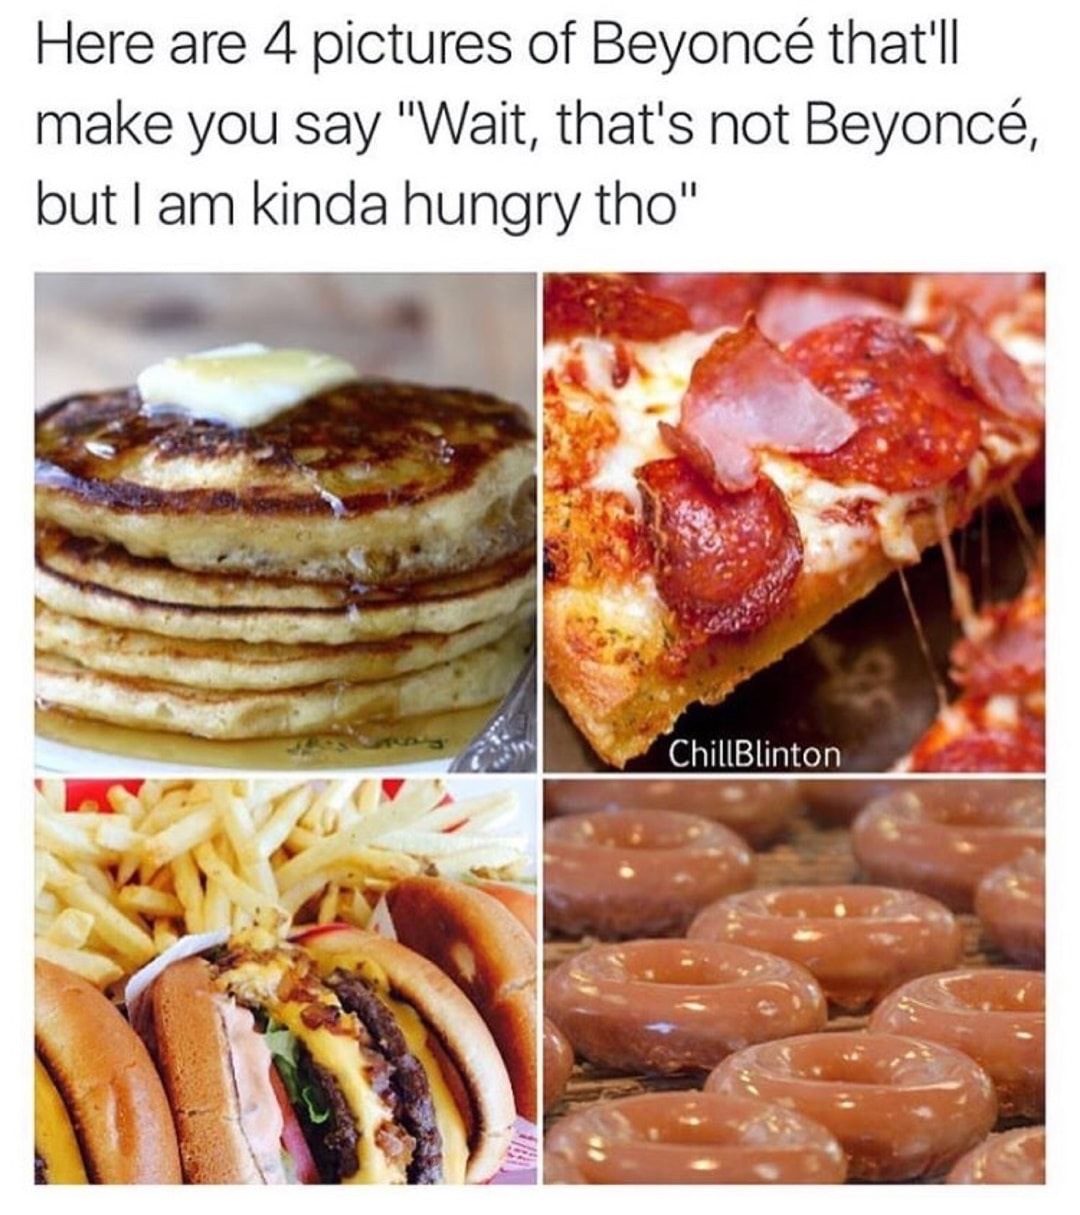 dank meme pepperoni - Here are 4 pictures of Beyonc that'll make you say "Wait, that's not Beyonc, but I am kinda hungry tho" ChillBlinton